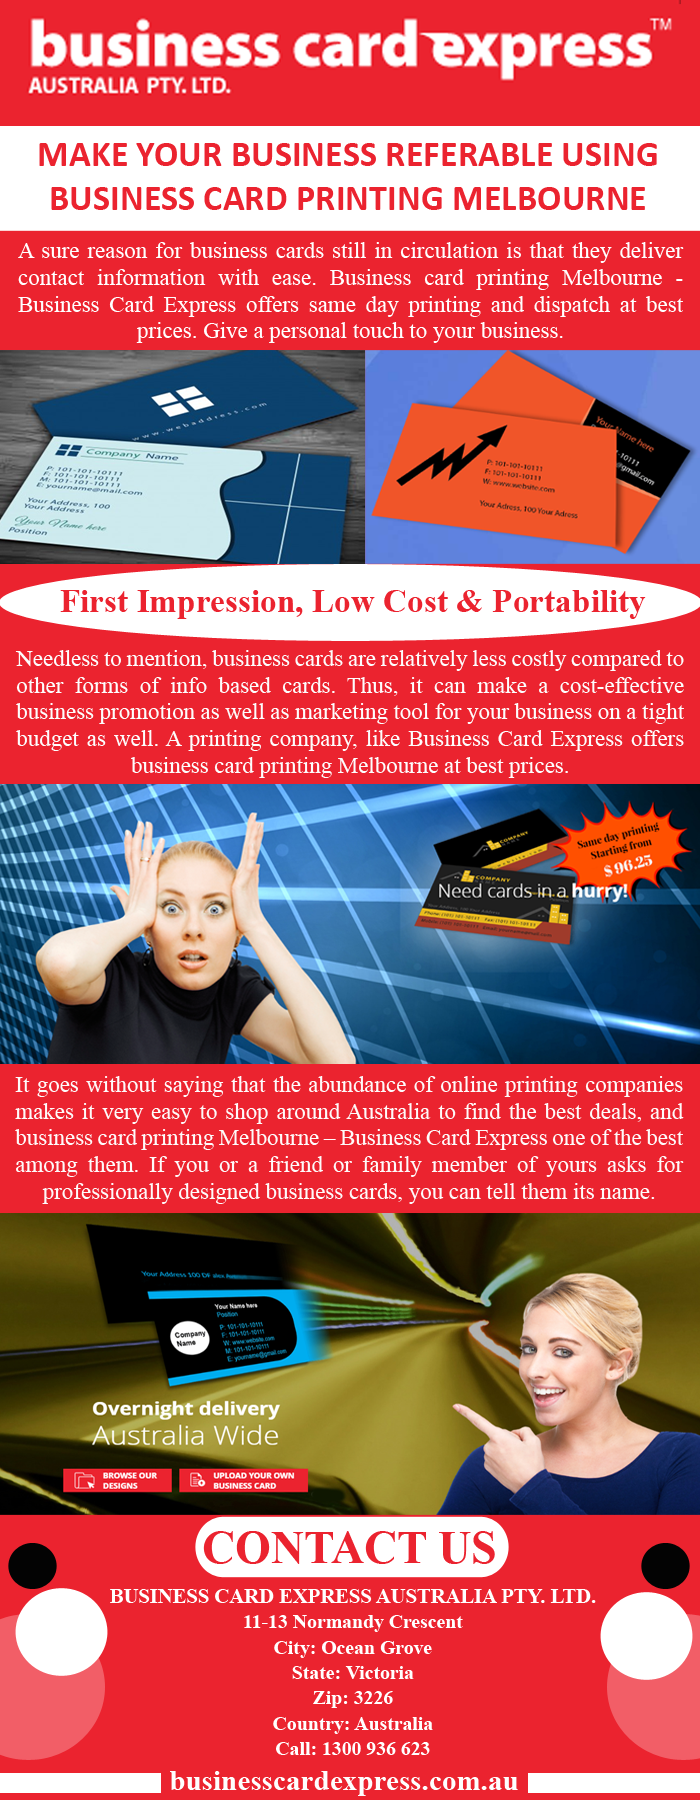 Make Your Business Referable Using Business Card Printing Melbourne.png Business card printing Melbourne - Business Card Express offers same day printing and dispatch at best prices. 
Please visit: https://businesscardexpress-au.blogspot.com/2021/08/make-your-business-referable-using.html
 by Businesscardexpress